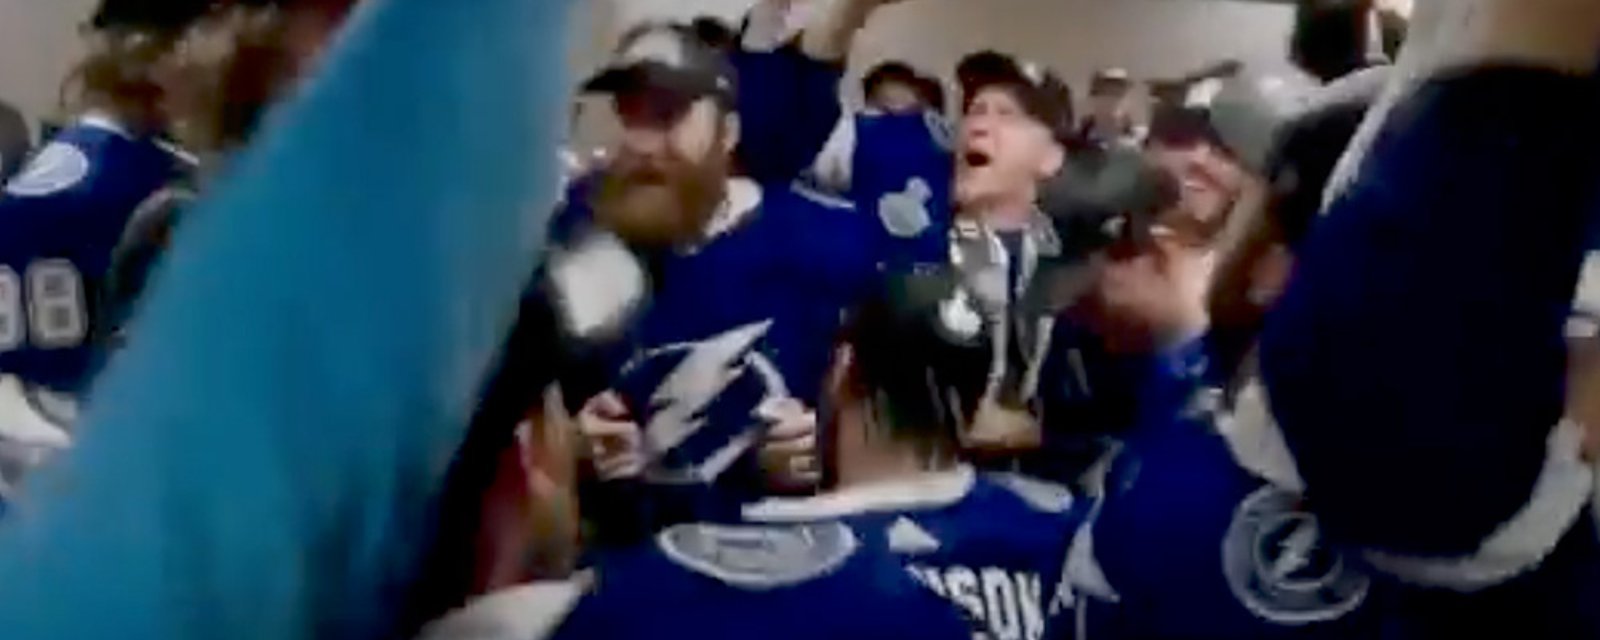 Tampa Bay Lightning continued to troll Habs during locker room celebration 